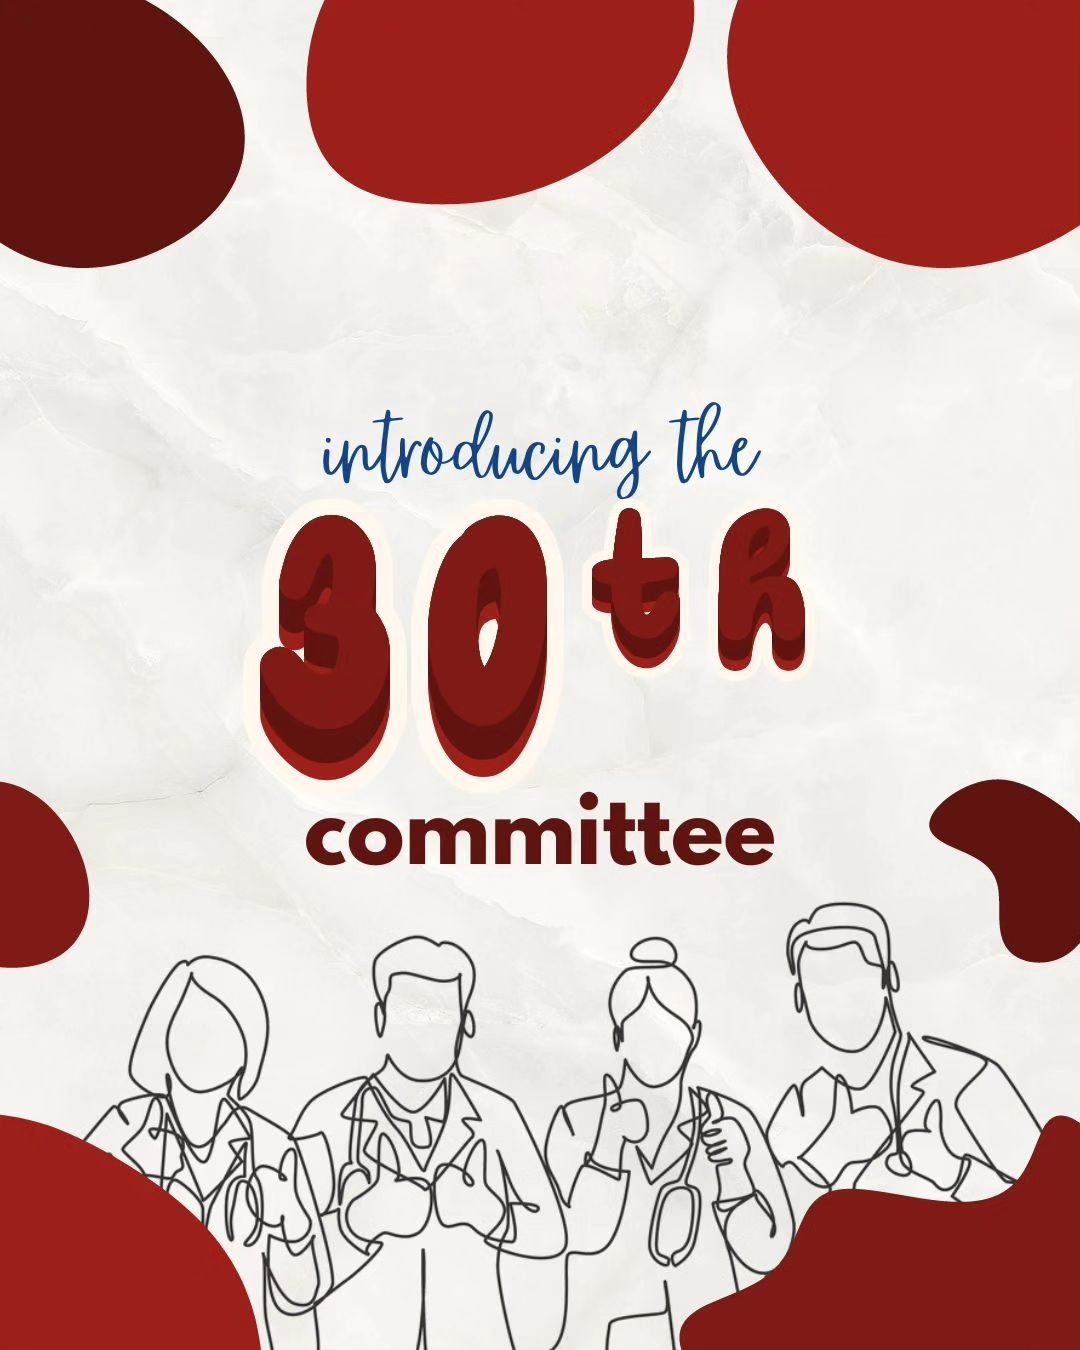 Hey SMSUK! 👋

We are thrilled to announce the 30th Executive Committee! We're excited to bring you another year of fun-filled and educational initiatives! We would also like to thank the 29th Committee for their invaluable contributions to the socie